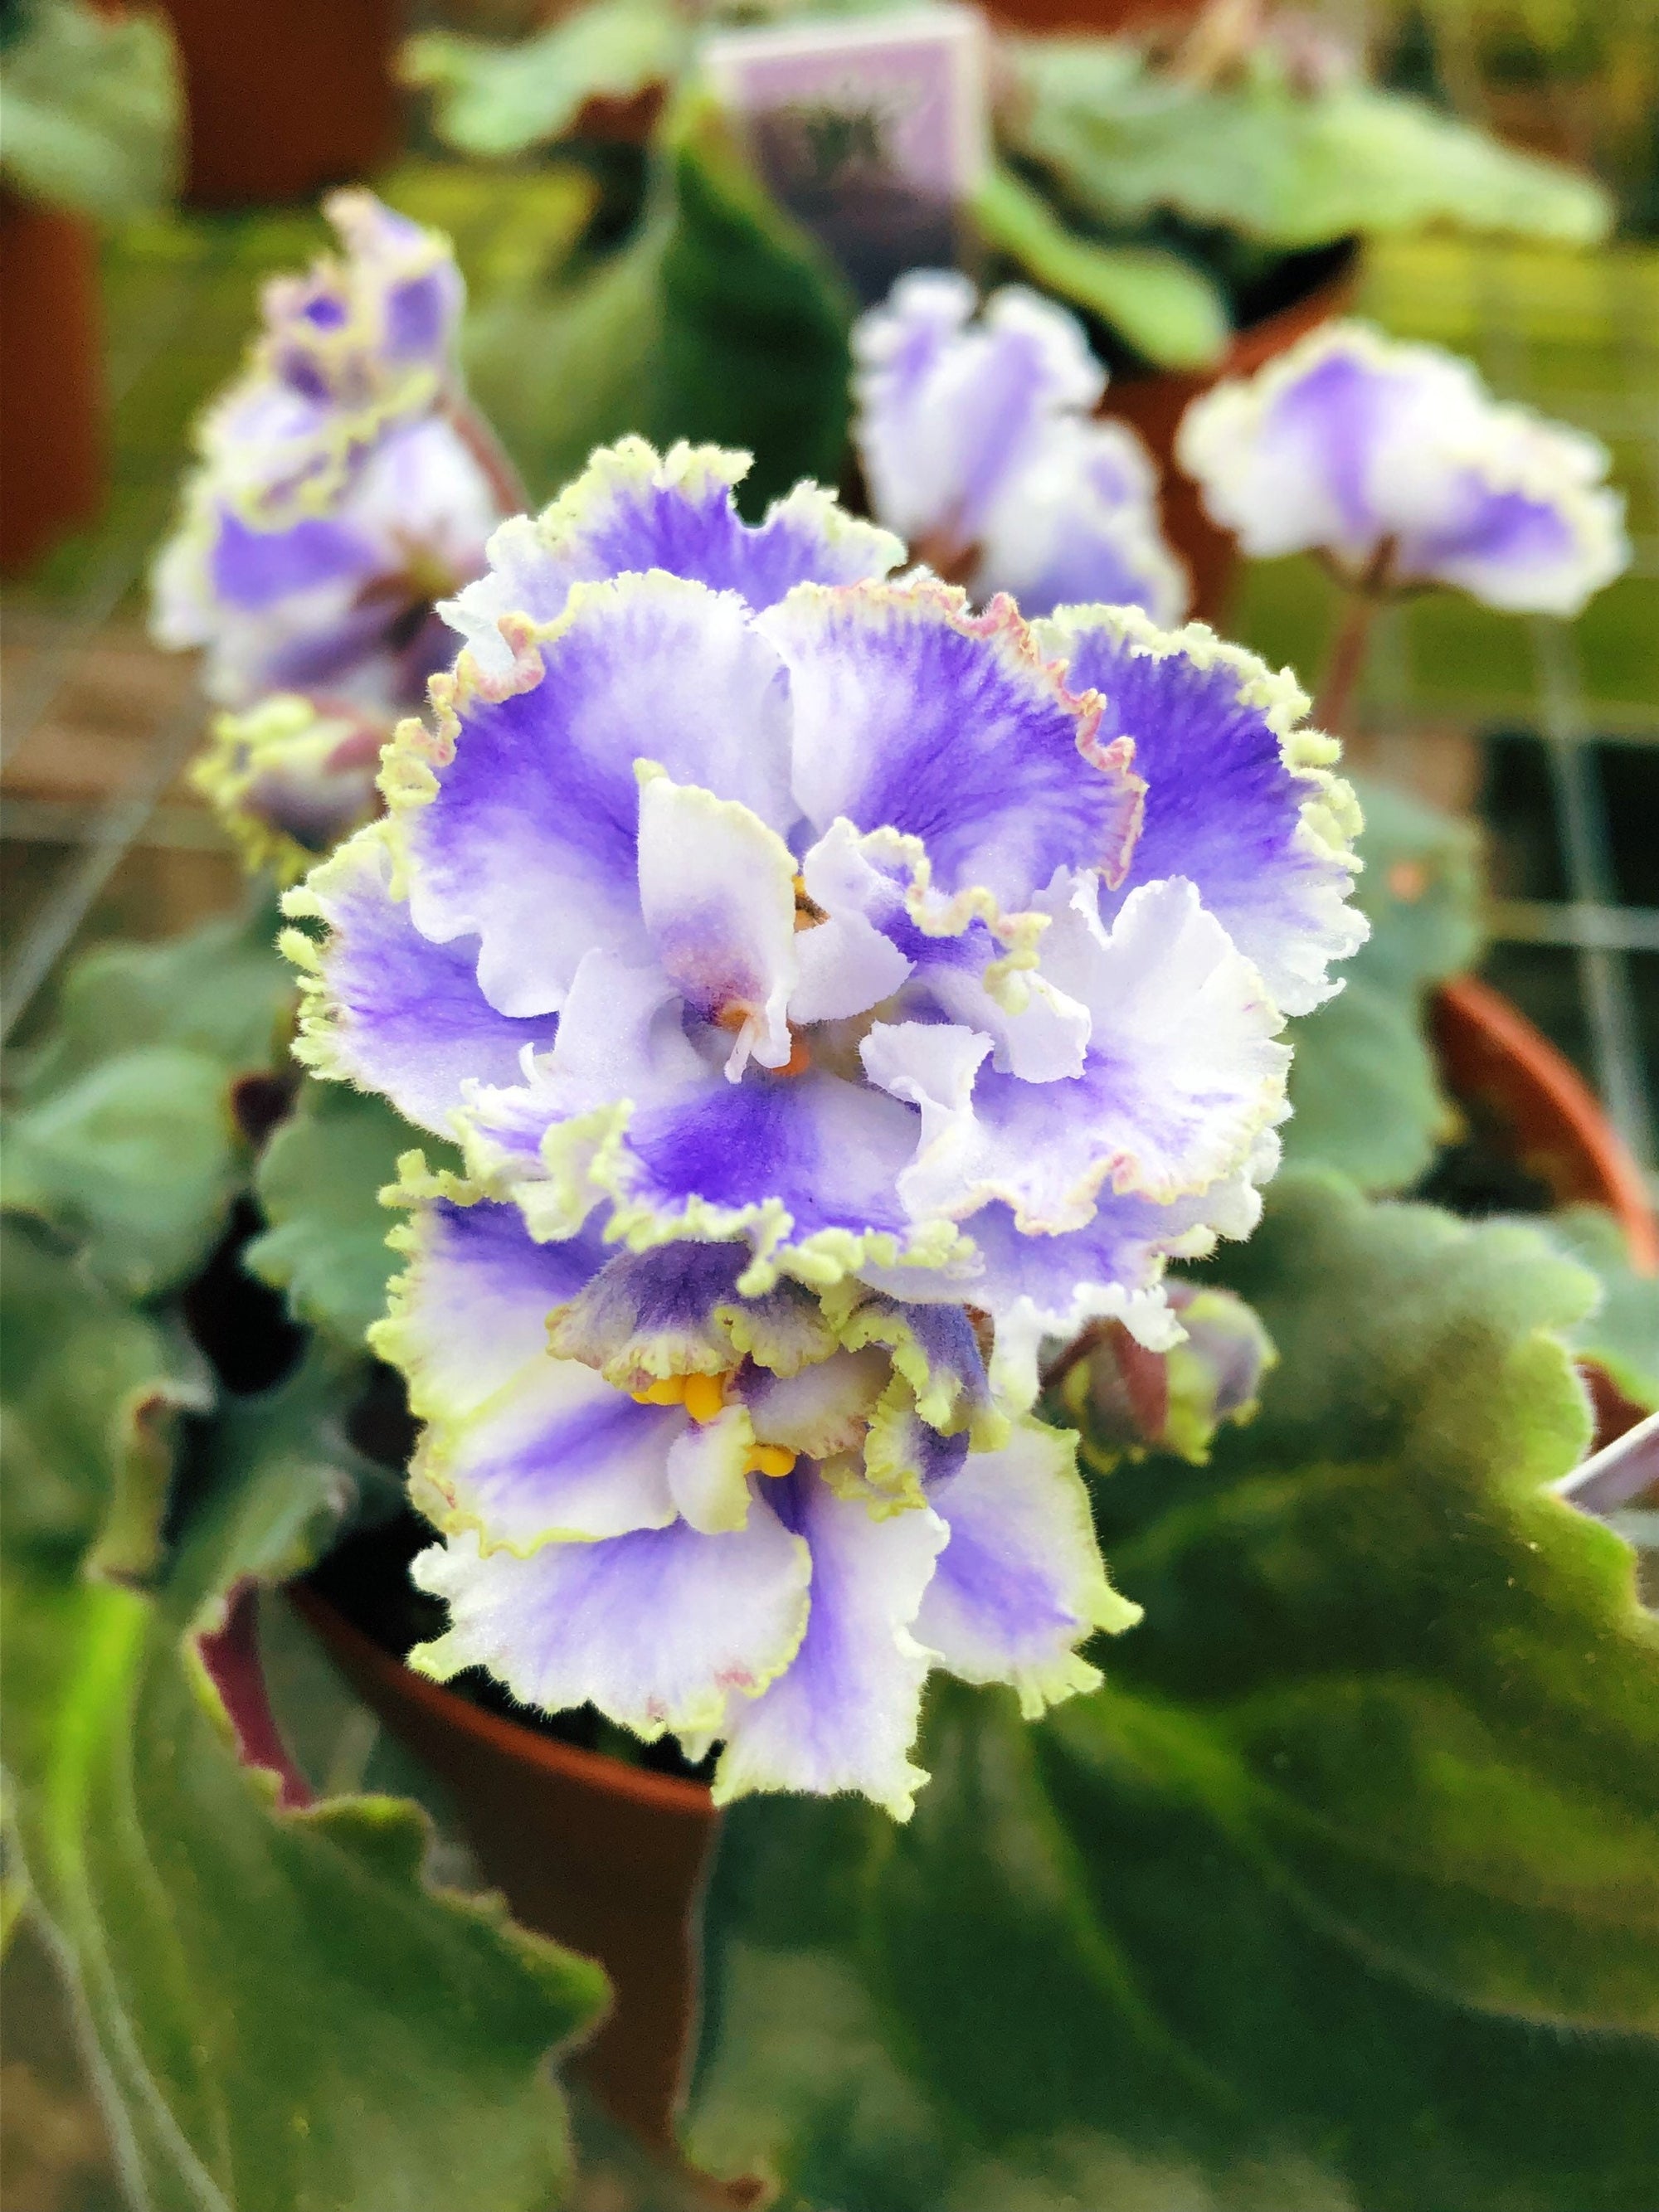 Live house plant variegated ruffle frilled bloom African Violet ‘Kei Yoki’ garden 4” flower Potted gift